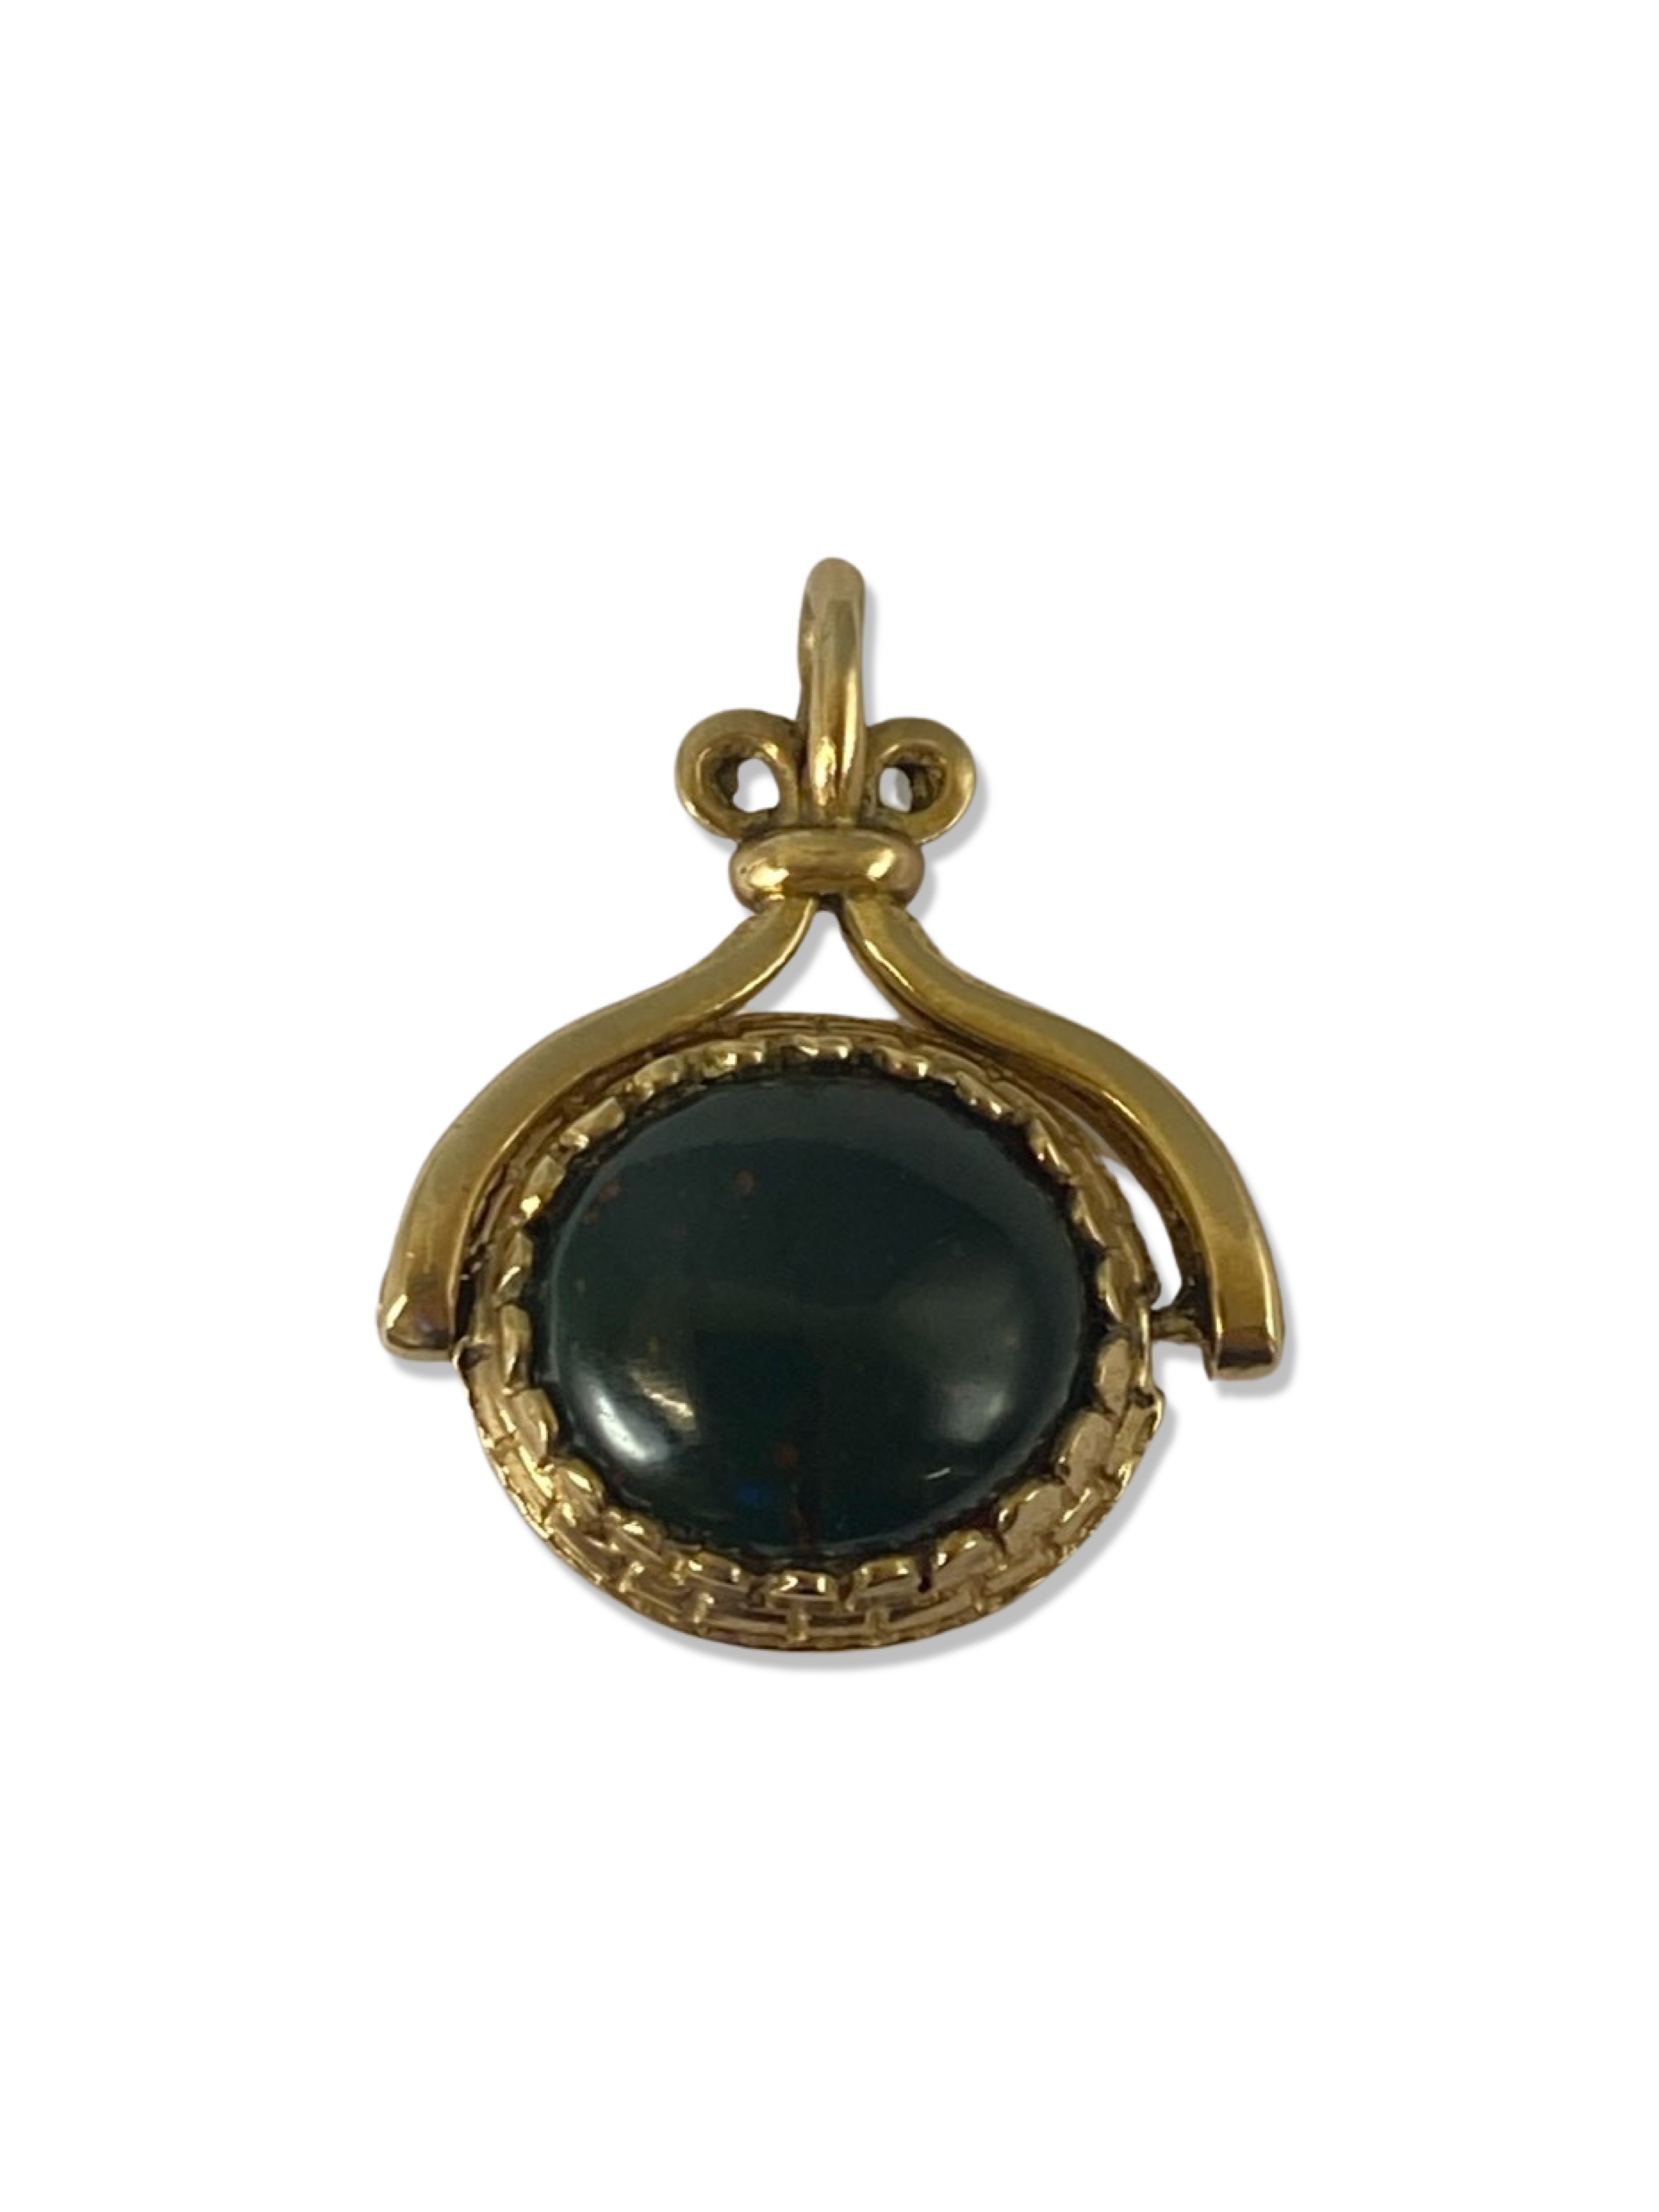 9ct Yellow Gold Two-Tone Fob Charm including onyx & carnelian weighing 7.27 grams - Image 2 of 2